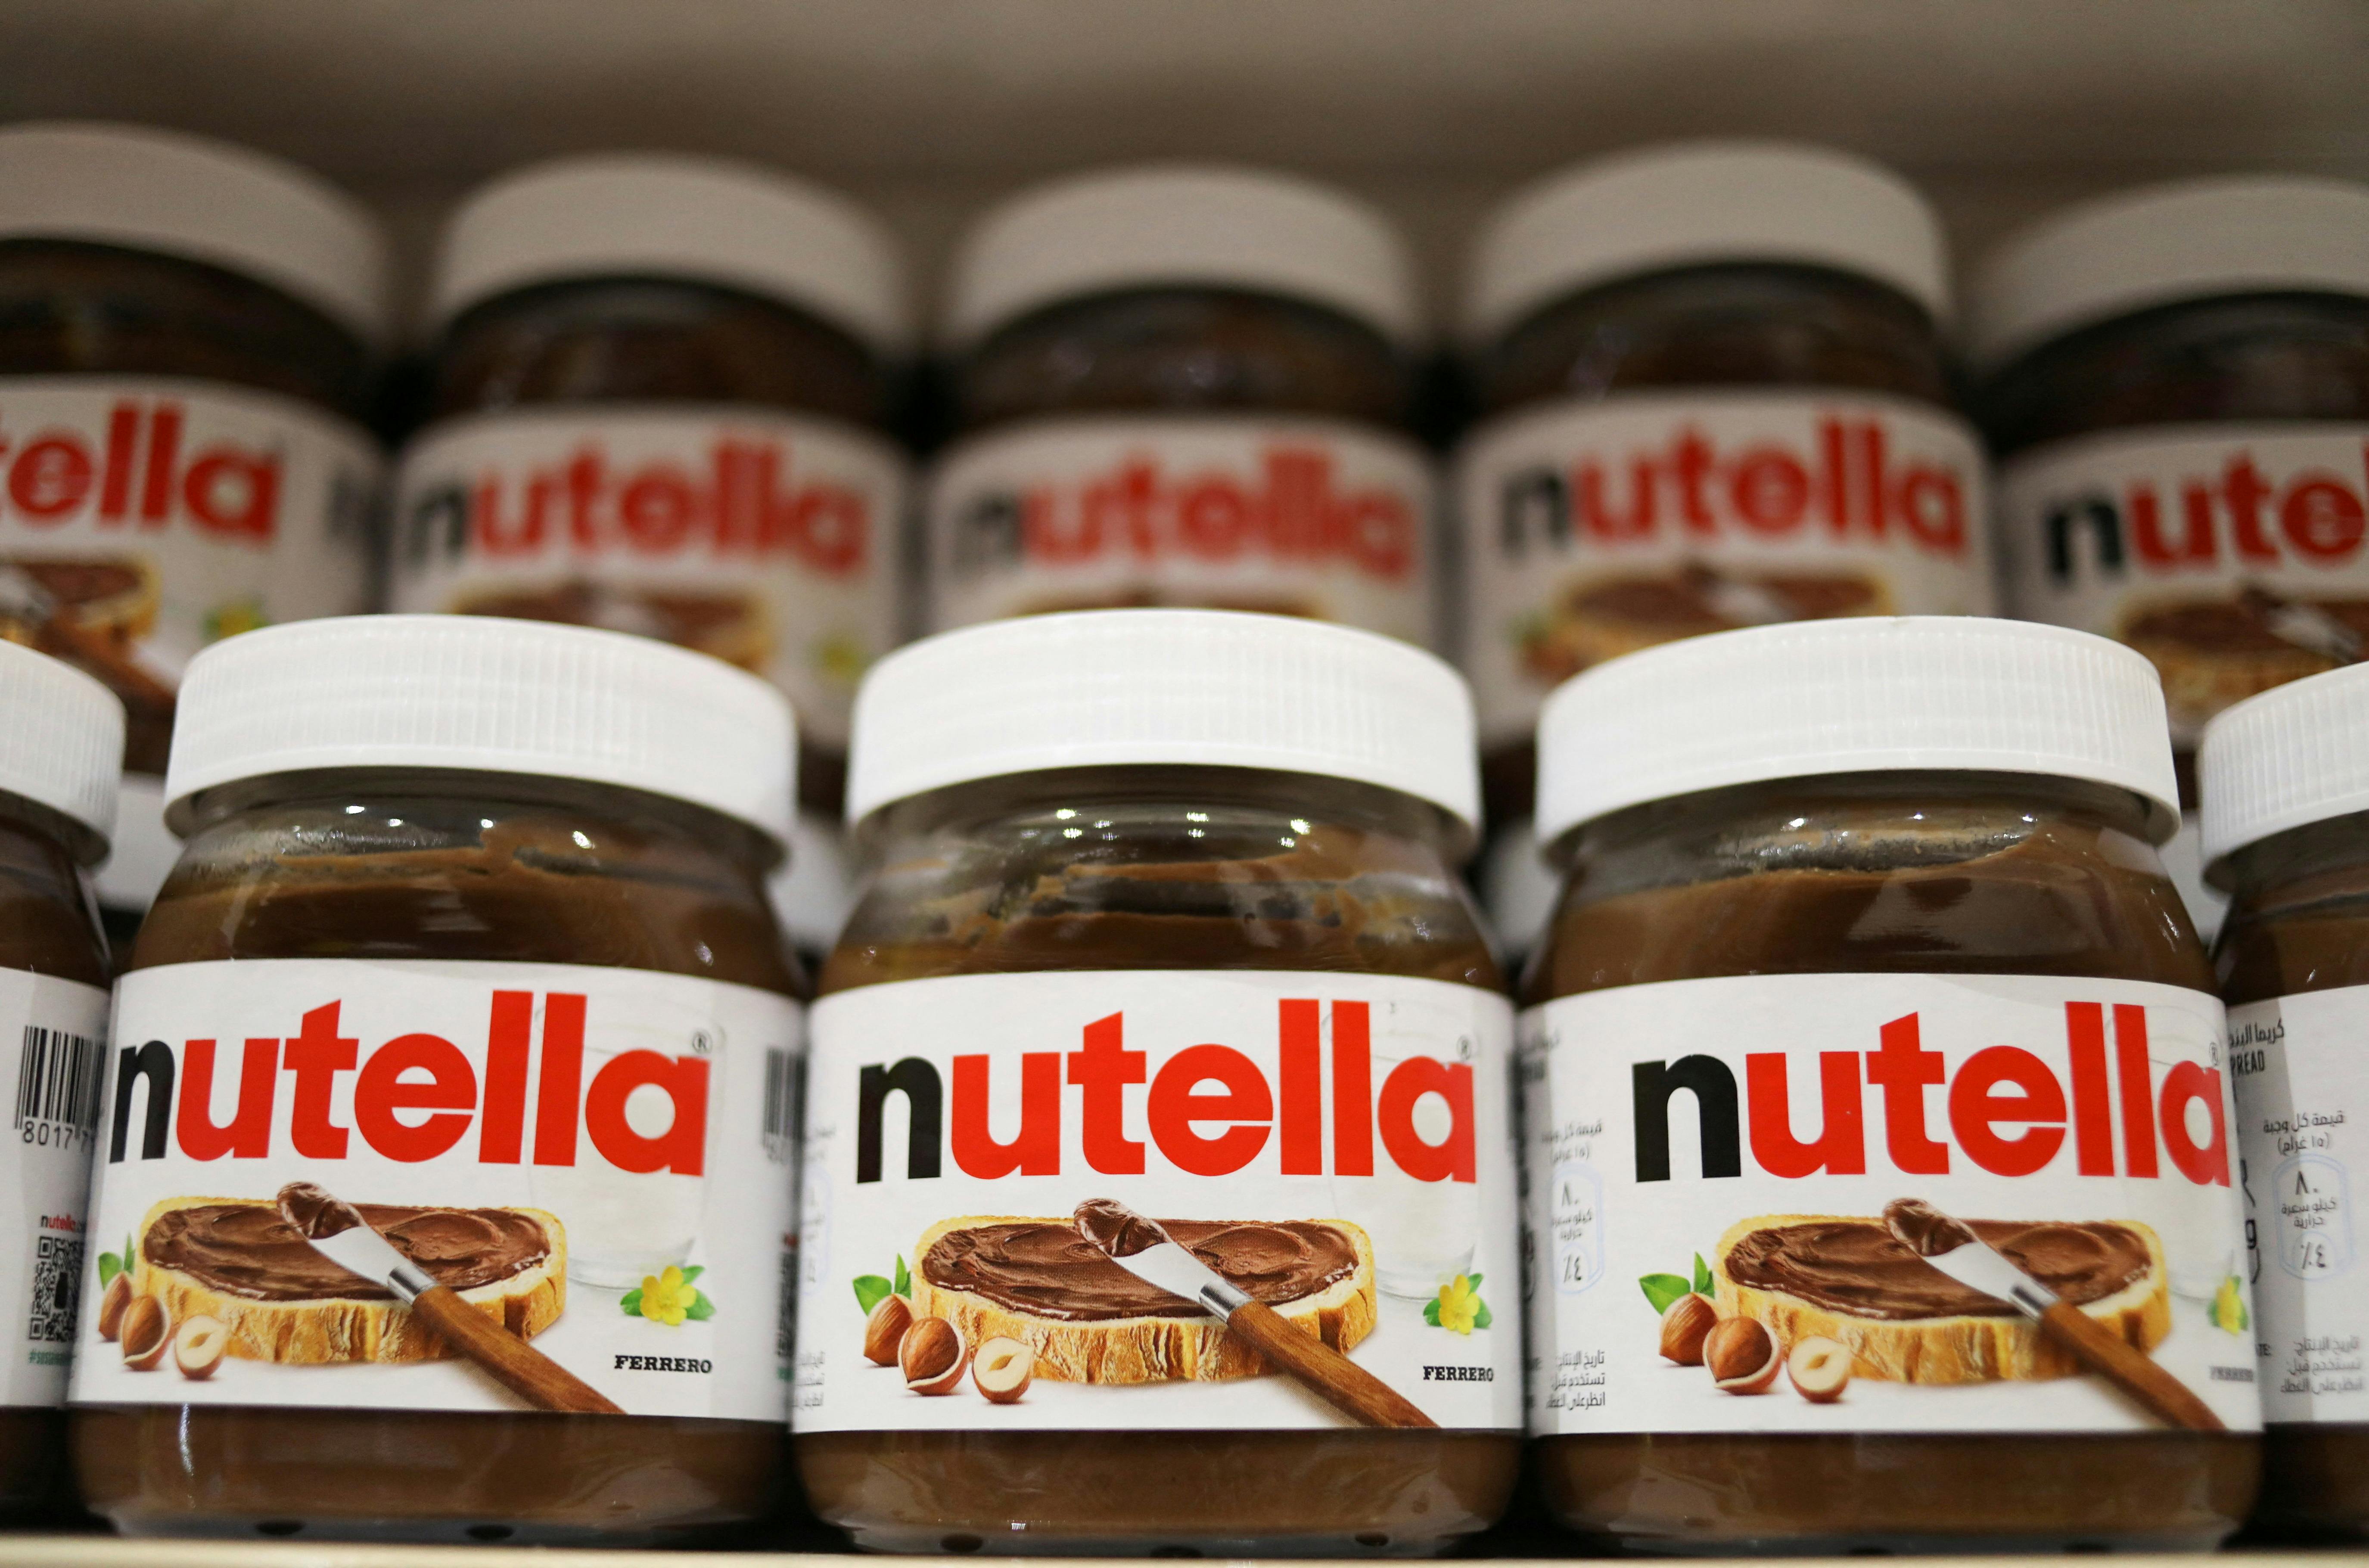 FILE PHOTO: Jars of Nutella spread produced by Italian confectionary maker Ferrero are displayed at a supermarked's shelf in Subang Jaya, Malaysia, April 14, 2022. Picture taken April 14, 2022. REUTERS/Hasnoor Hussain/File Photo